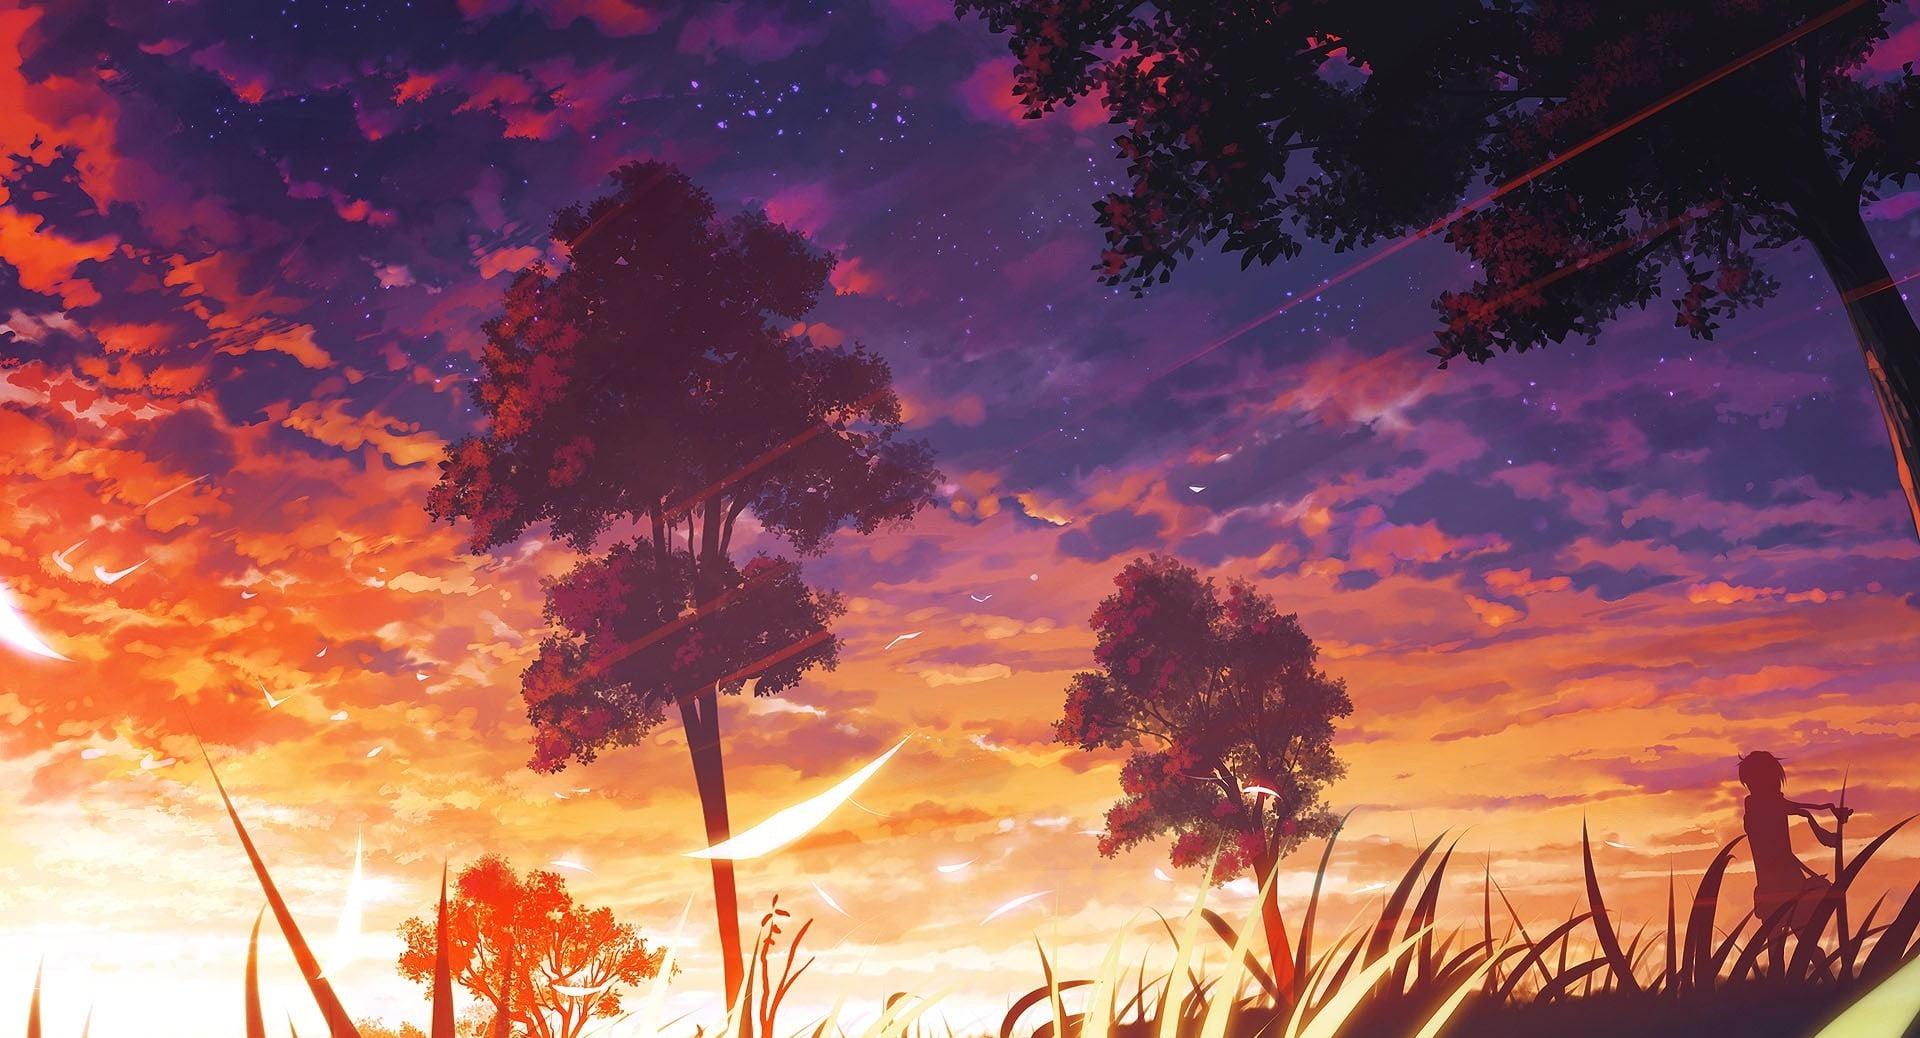 Red and white abstract painting, anime, landscape, sunset, artwork